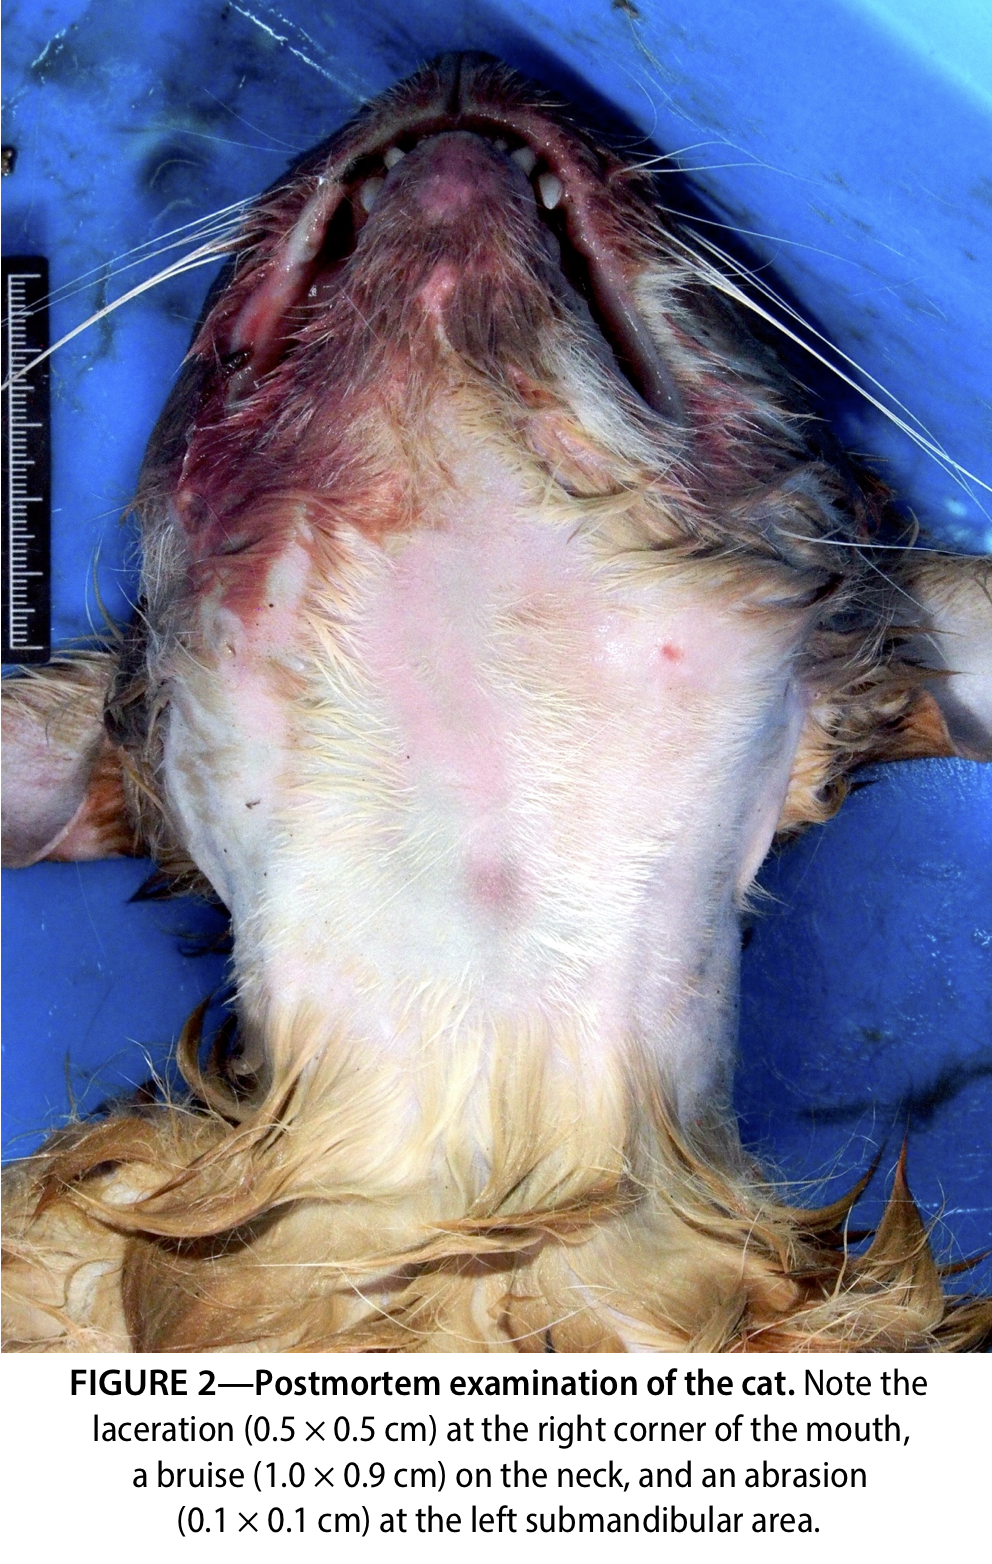 Figure 2—Postmortem examination of the cat. Note the laceration (0.5 × 0.5 cm) at the right corner of the mouth, a bruise (1.0 × 0.9 cm) on the neck, and an abrasion (0.1 × 0.1 cm) at the left submandibular area.